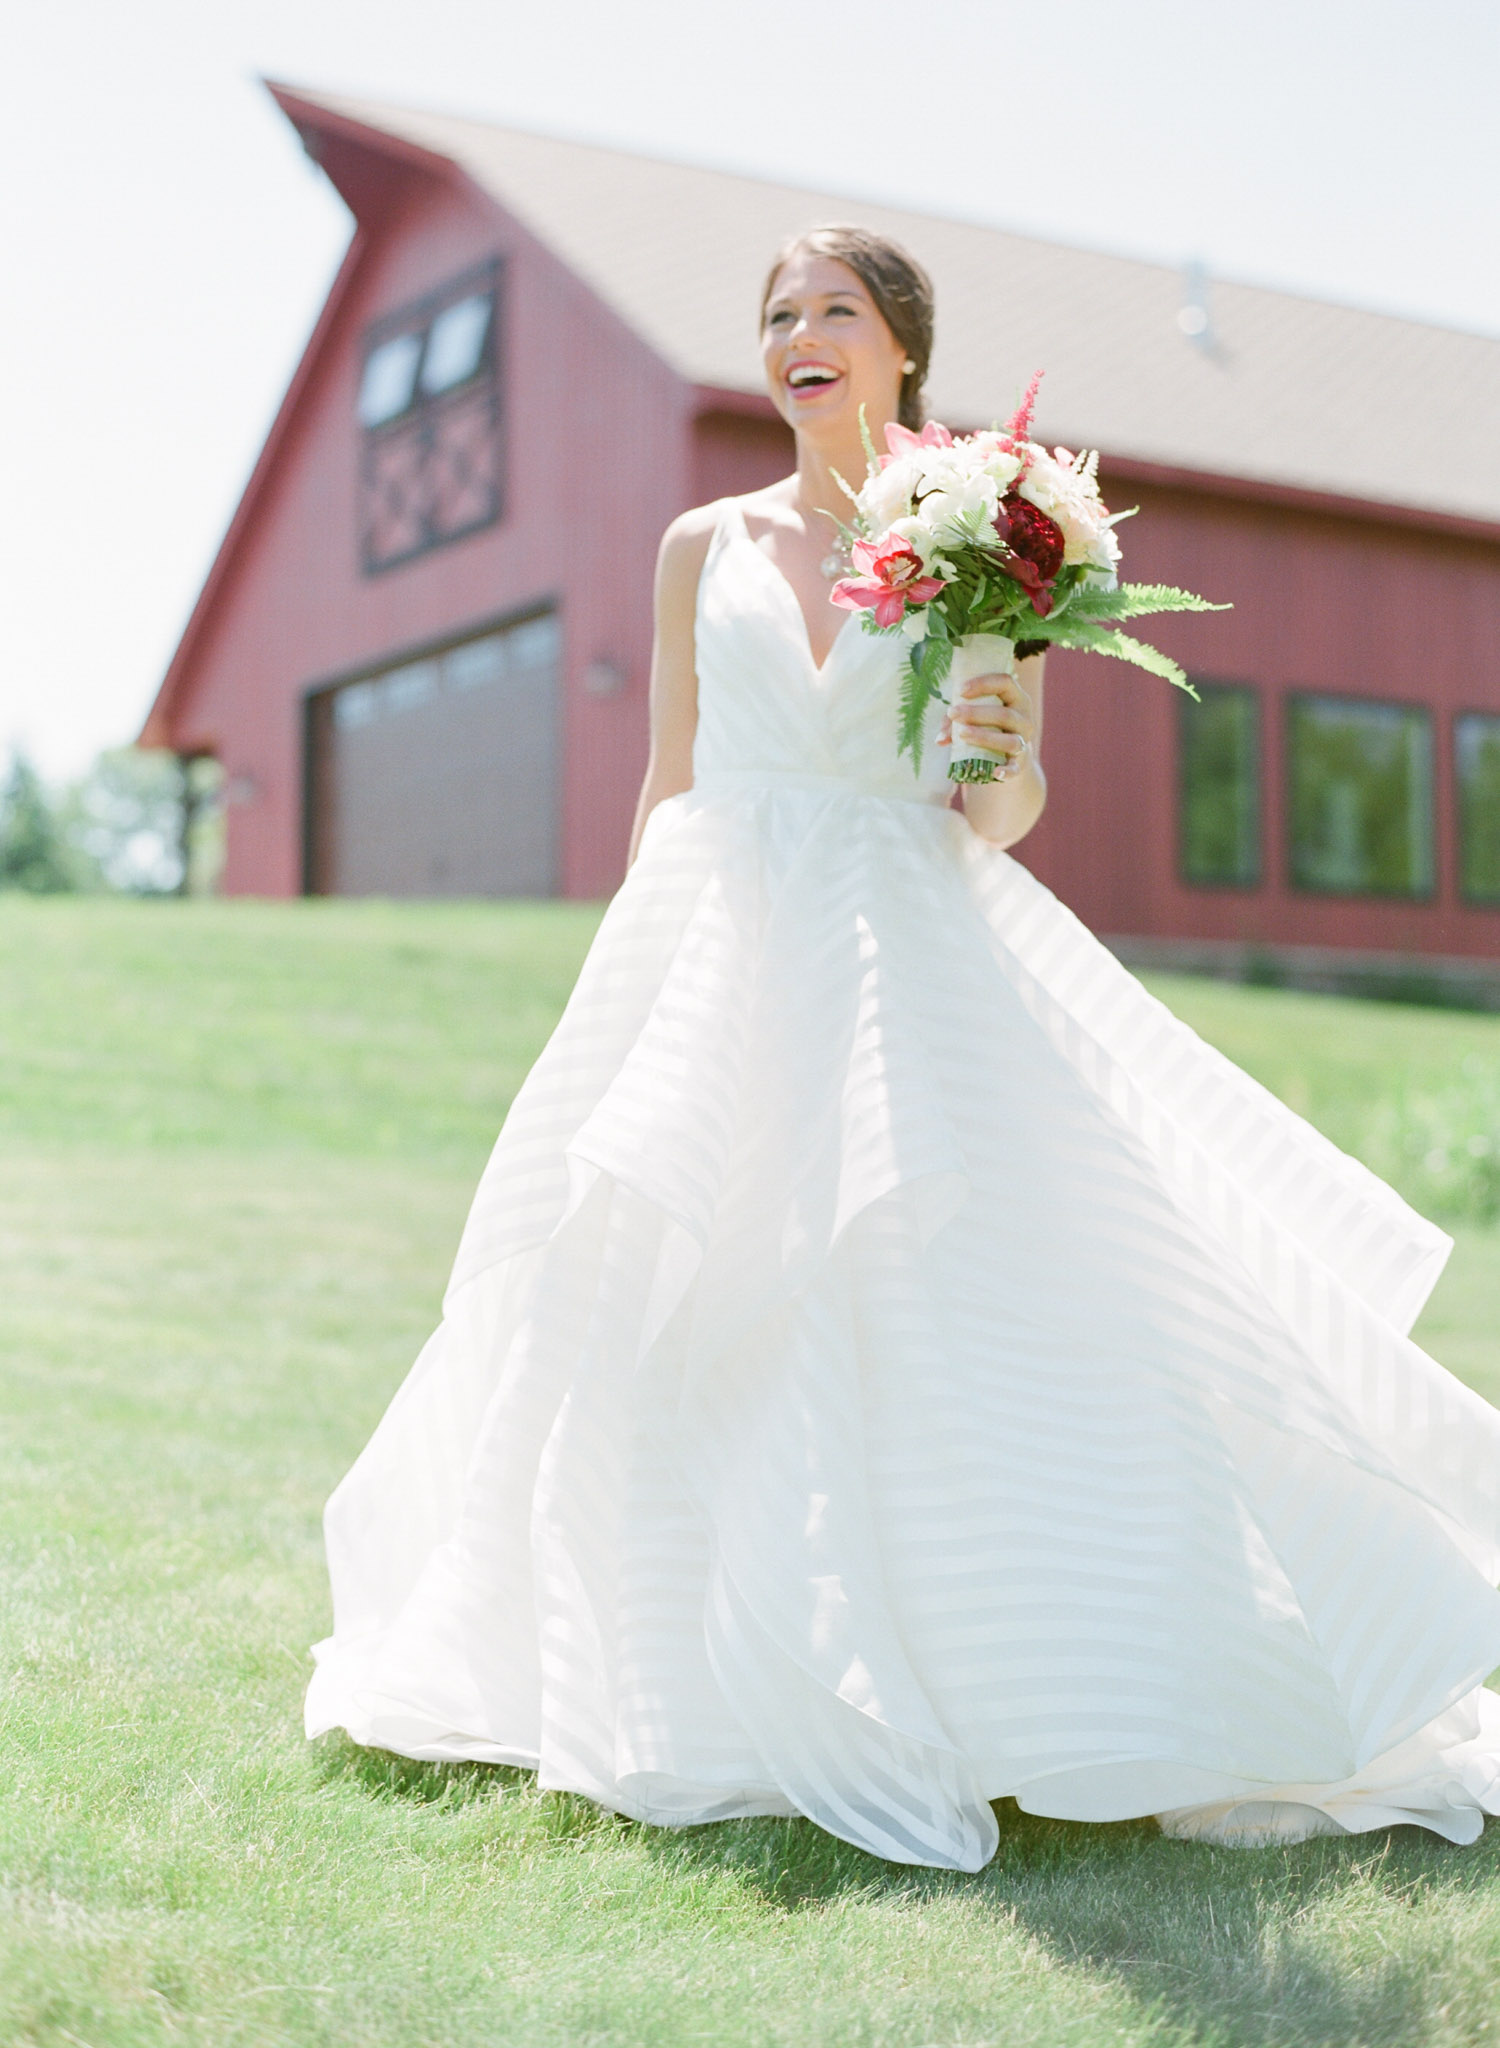 Bride in front of Barn